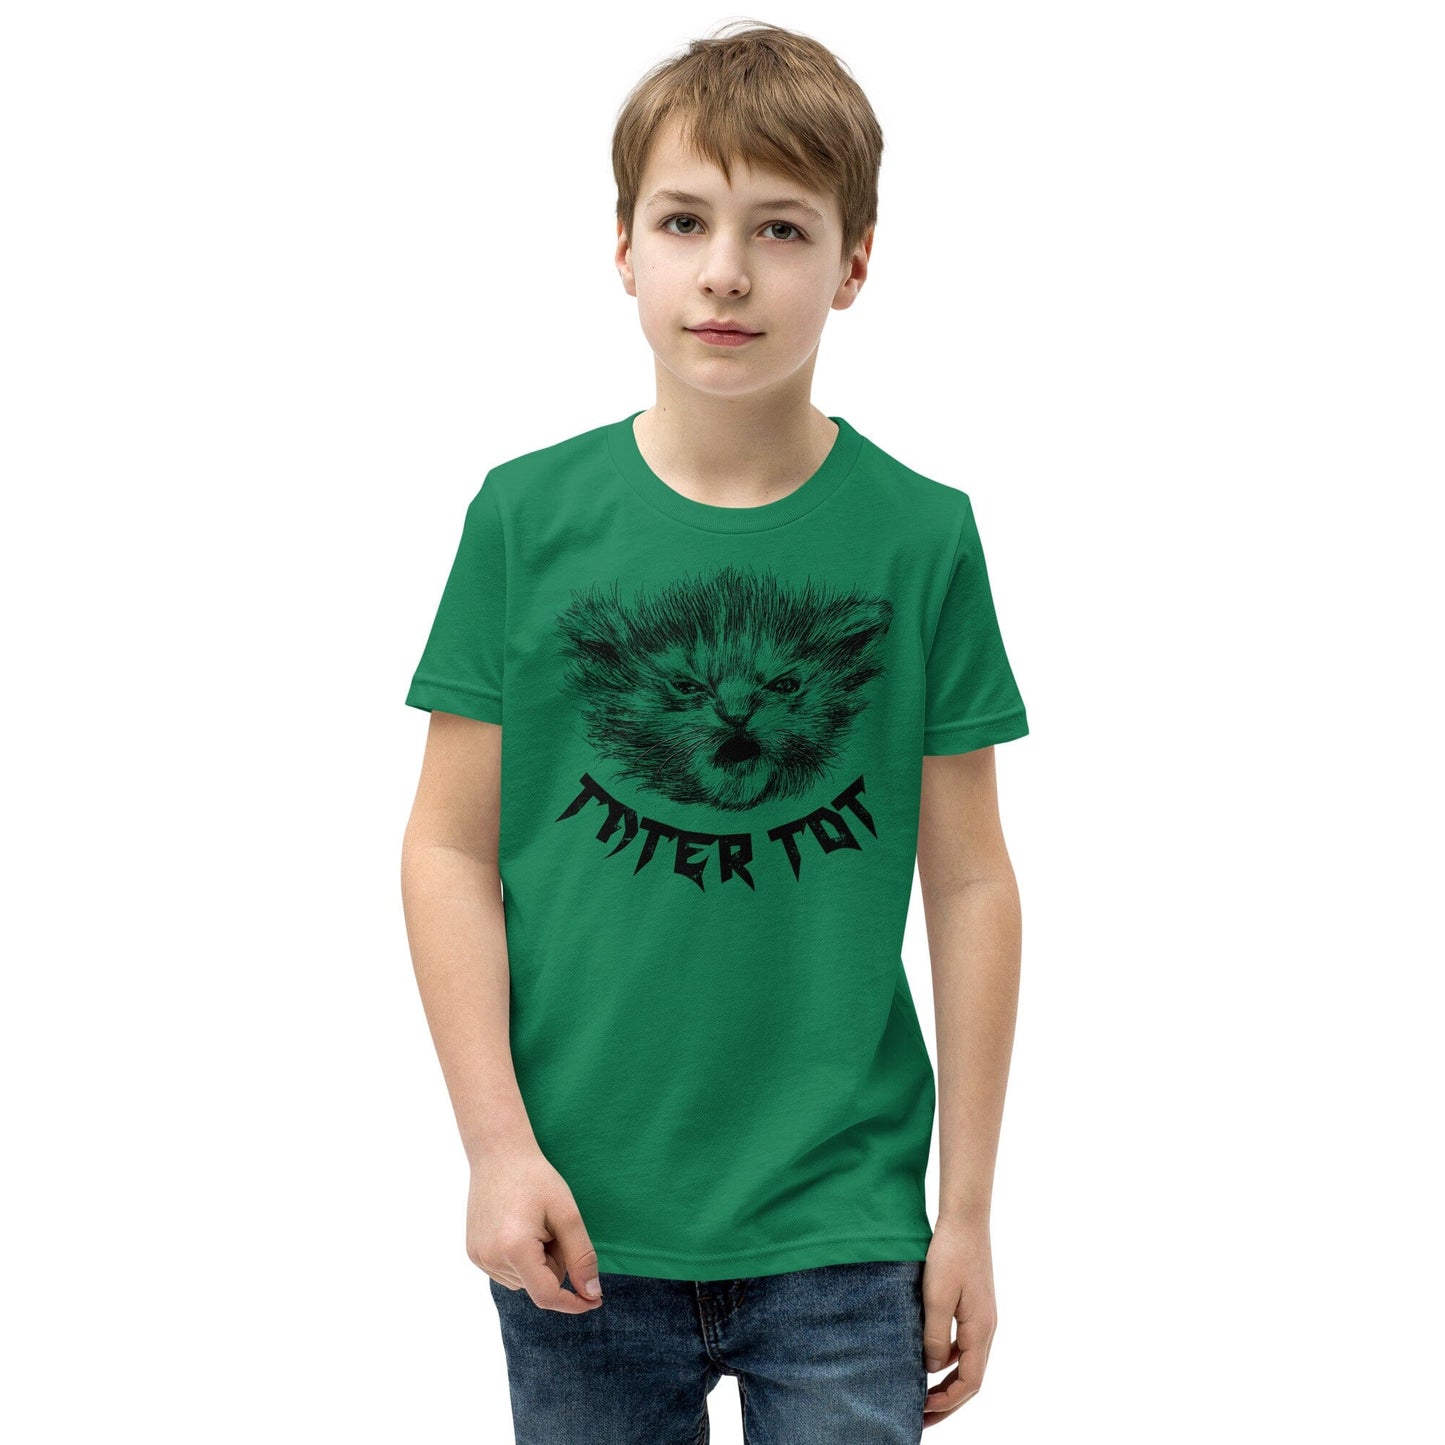 Metal Tater Tot YOUTH T-Shirt [Unfoiled] (All net proceeds go to Kitty CrusAIDe) JoyousJoyfulJoyness Kelly S 